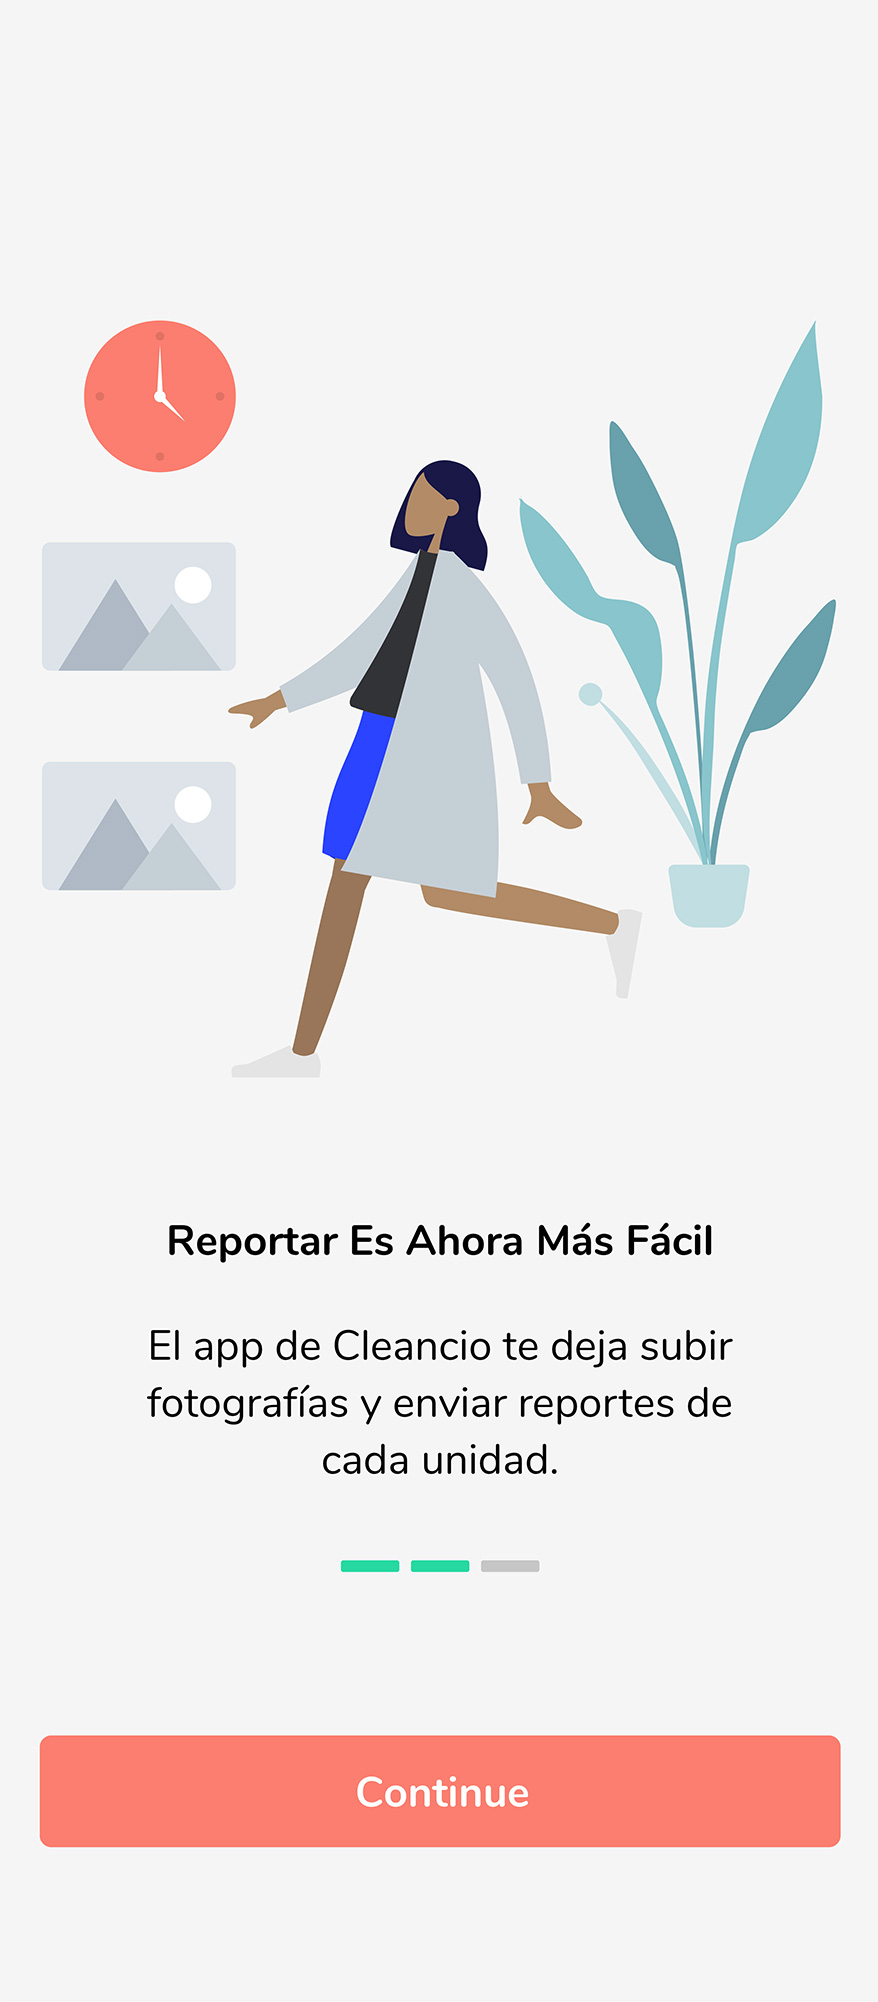 Onboarding screen describing how reporting is now easier with the Cleancio app.